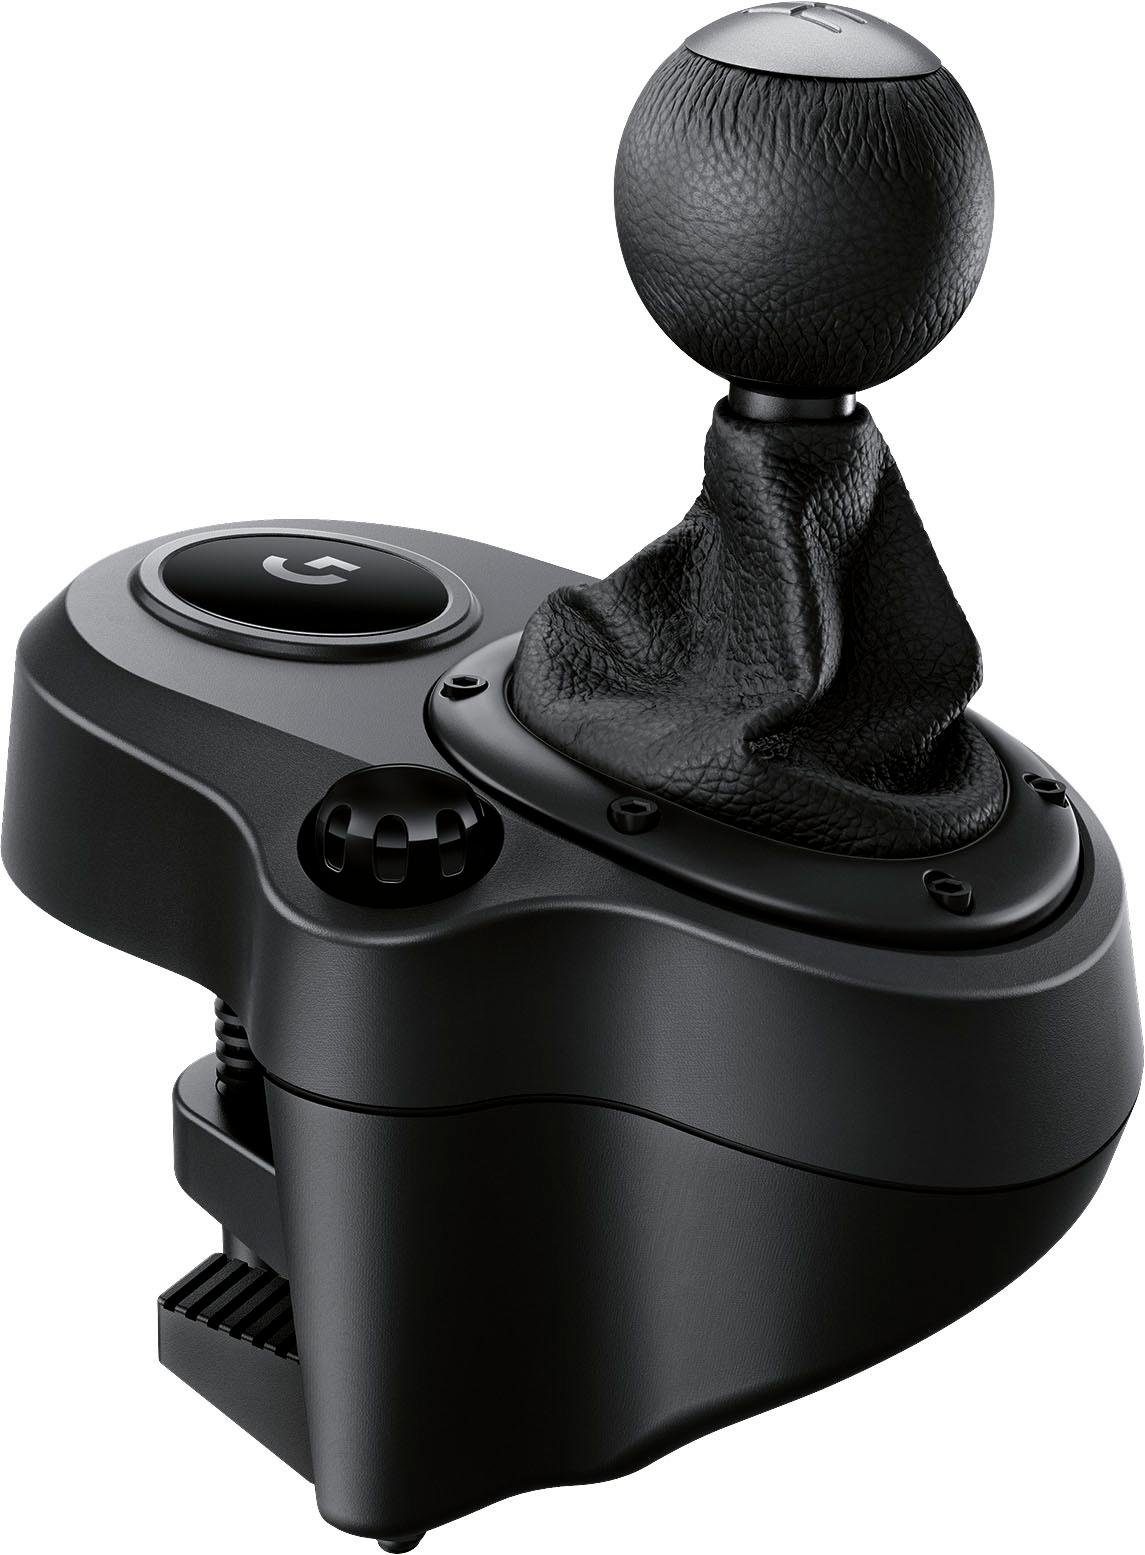 Logitech G »Driving Force Shifter« Gaming-Controller online kaufen | OTTO